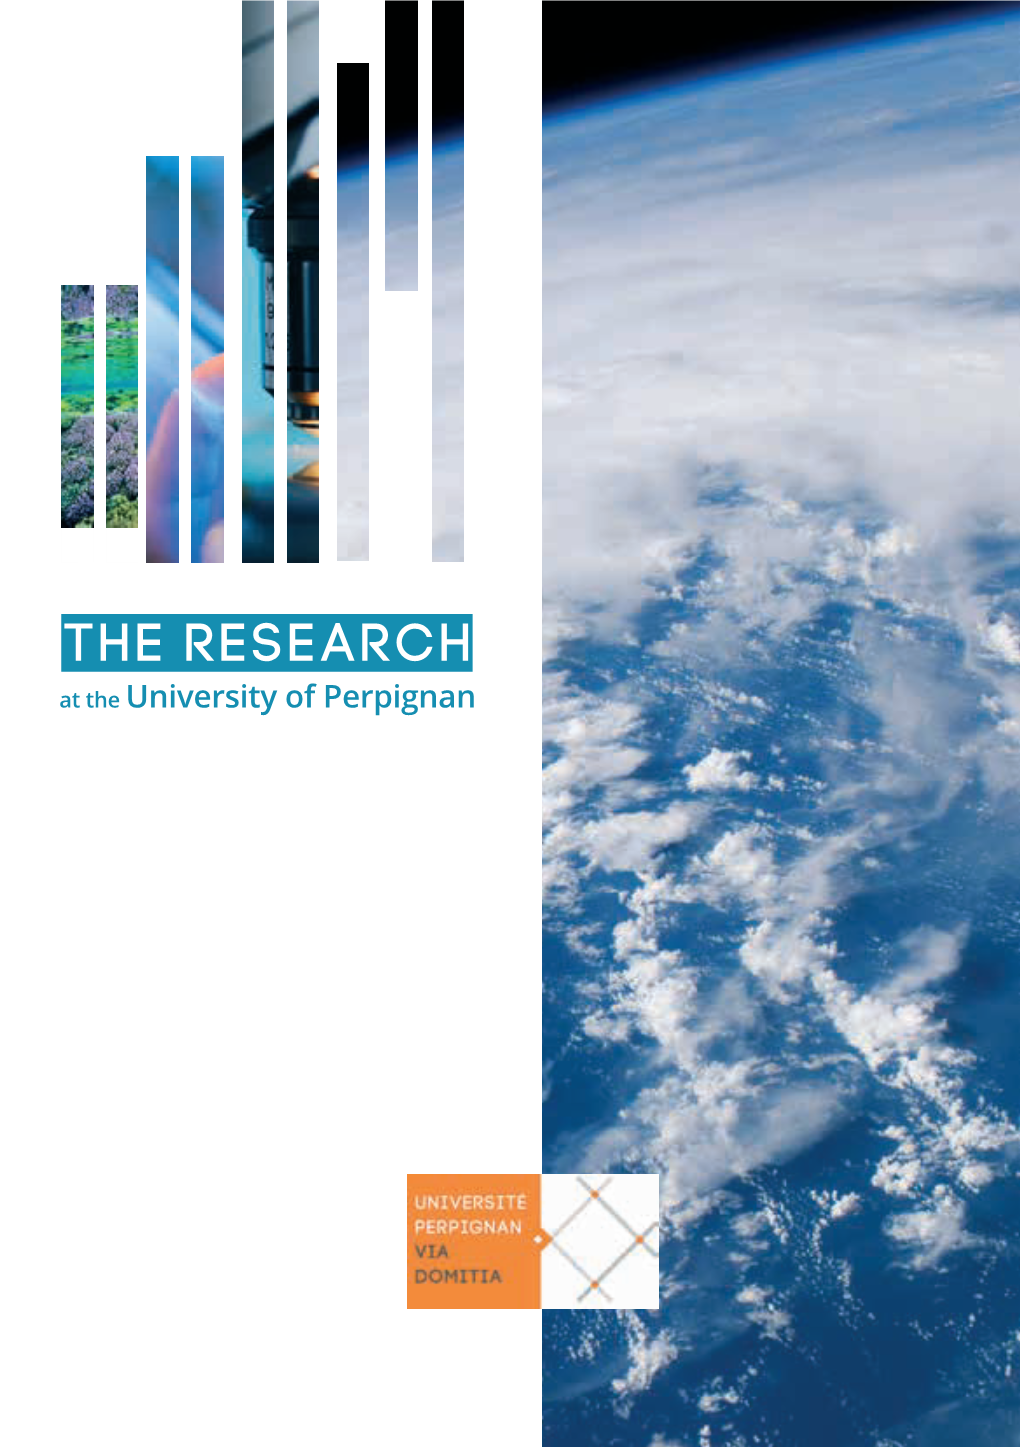 THE Research at the University of Perpignan